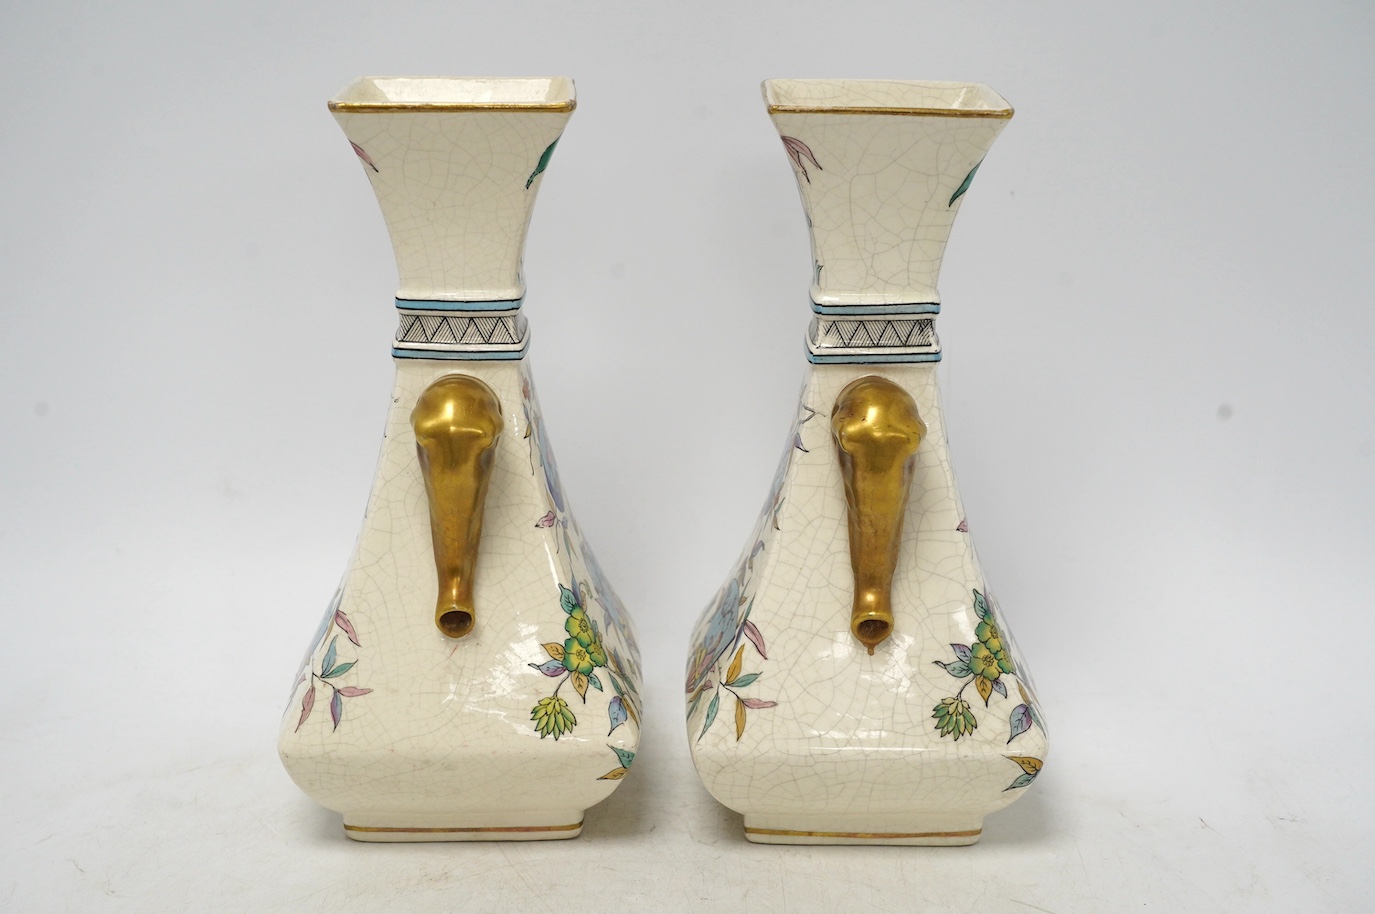 A pair of Christopher Dresser Old Hall crackleware Japanese inspired vases with gilt decorated elephant handles, 24cm high. Condition - good